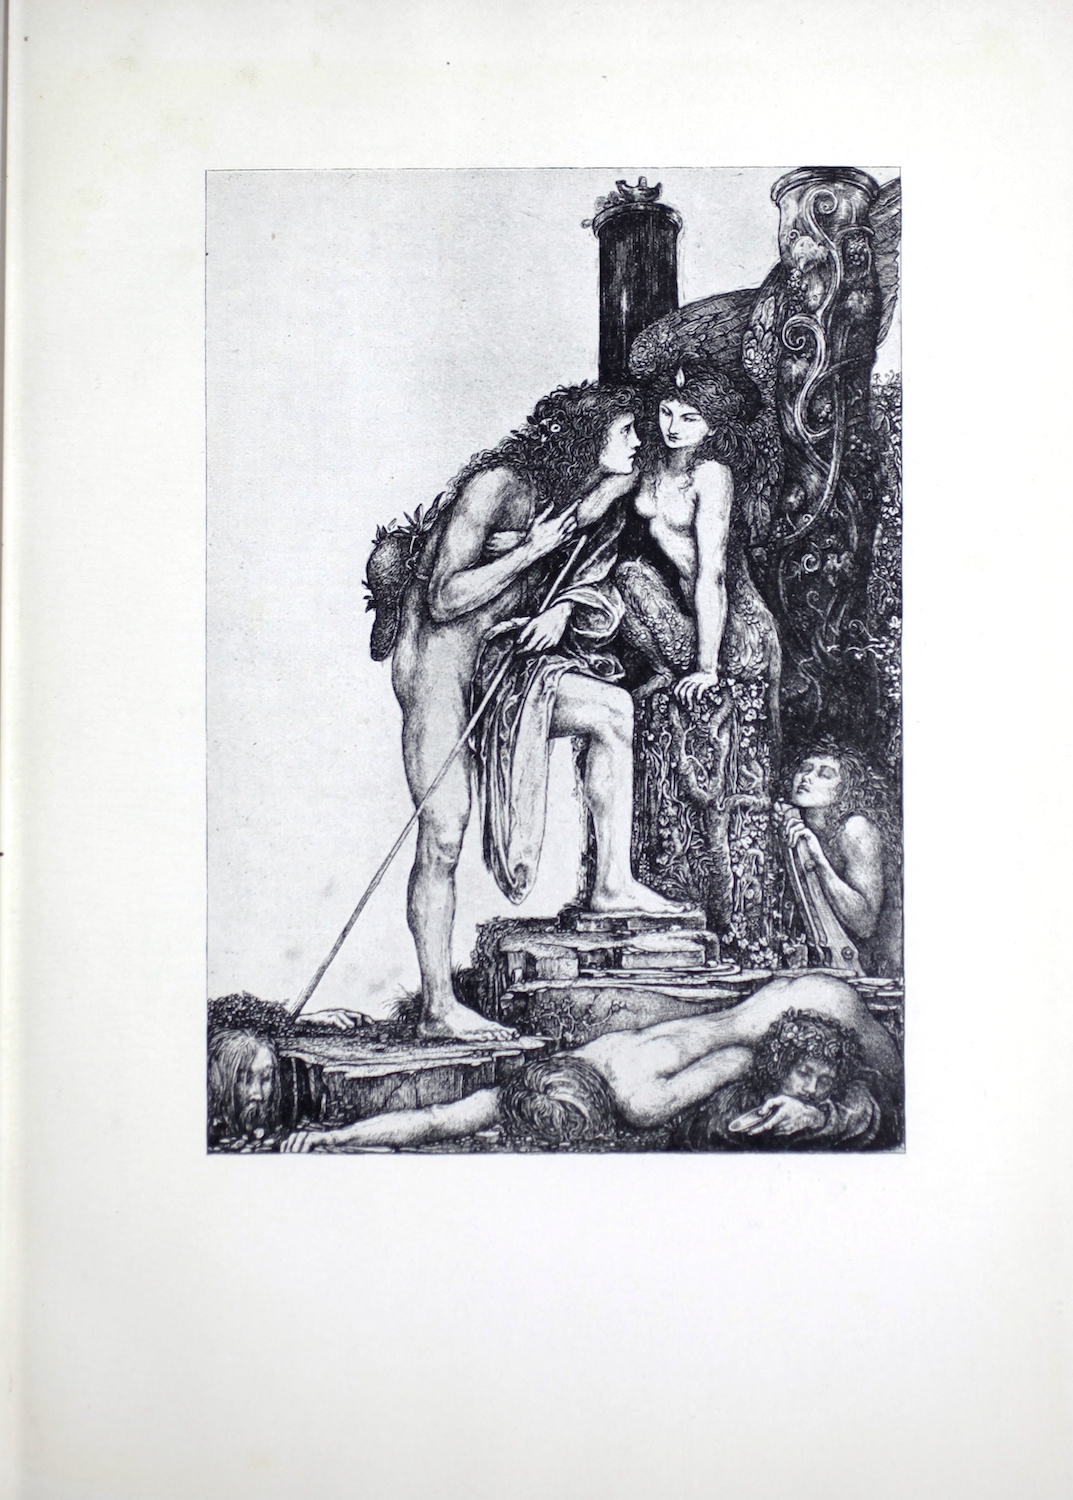 Ricketts’ reproduced pen drawing portrays the ancient Greek myth of Oedipus and the Sphinx. In the image, Oedipus is leaning in toward the Sphinx to answer her question. The dead bodies scattered on the ground suggest that other men have tried and failed her test. Oedipus stands naked, in three-quarter profile facing the right. He has long tangled hair and there are a couple of small flowers in the tangles. His right leg is straight, and his left leg is bent as he is on steps and bends forward to speak to the Sphinx. On his lap rests his unworn robe and his staff, loosely held up by his left hand. A hat hangs down his back from a string around his neck. Facing Oedipus is the Sphinx, which has a female human upper body and the lower body of a lion. She also has large wings on her back. She is in three-quarter profile facing left and sits on a pillar which looks like it is carved from a tree stump and covered in vines. Her eyes look down, suggesting that she is listening to Oedipus speak. She is surrounded by two large pillars with vines crawling up their length. The pillar furthest from the viewer has a small smoking lamp resting on the top. The top of the pillar closest to the viewer cannot be seen. Behind the Sphinx, a woman is emerging from underground, climbing a ladder. Her hair is loose, her eyes closed, and her left arm and hand are visible to the viewer. Her head is turned up to the sky. This woman may represent Jocasta, the widowed queen whom Oedipus marries and discovers later is his own mother. The background sky of the image is empty, drawing the viewers’ eyes to the ground where, around Oedipus’s feet, we see three dead bodies of men who failed the Sphinx’s test.